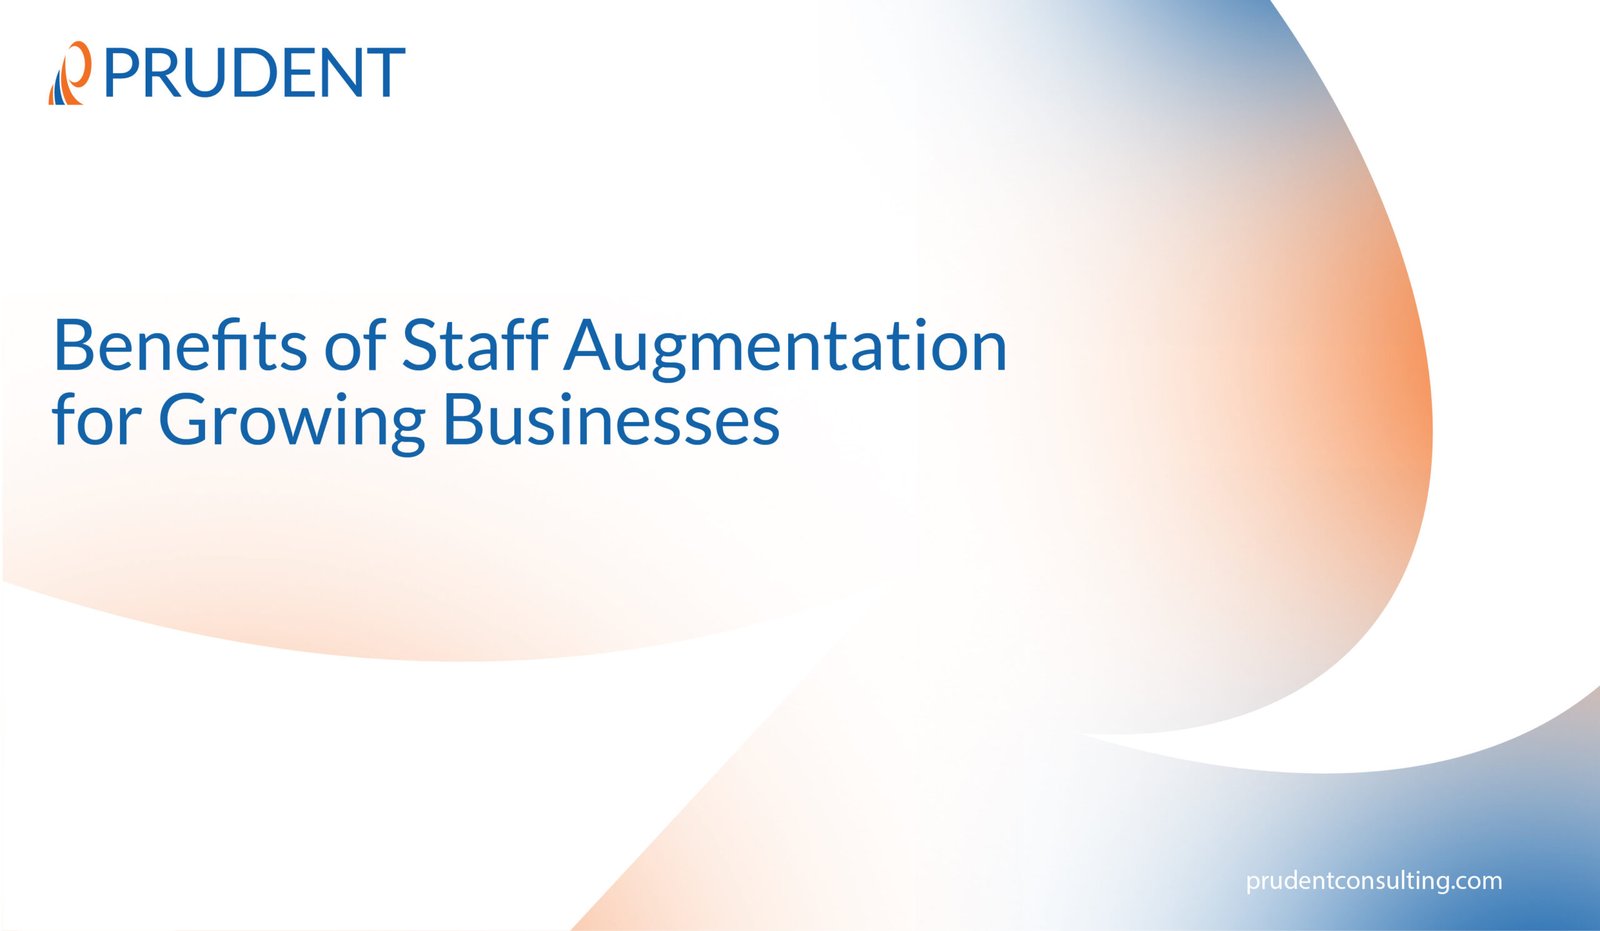 Benefits of Staff Augmentation for Growing Businesses